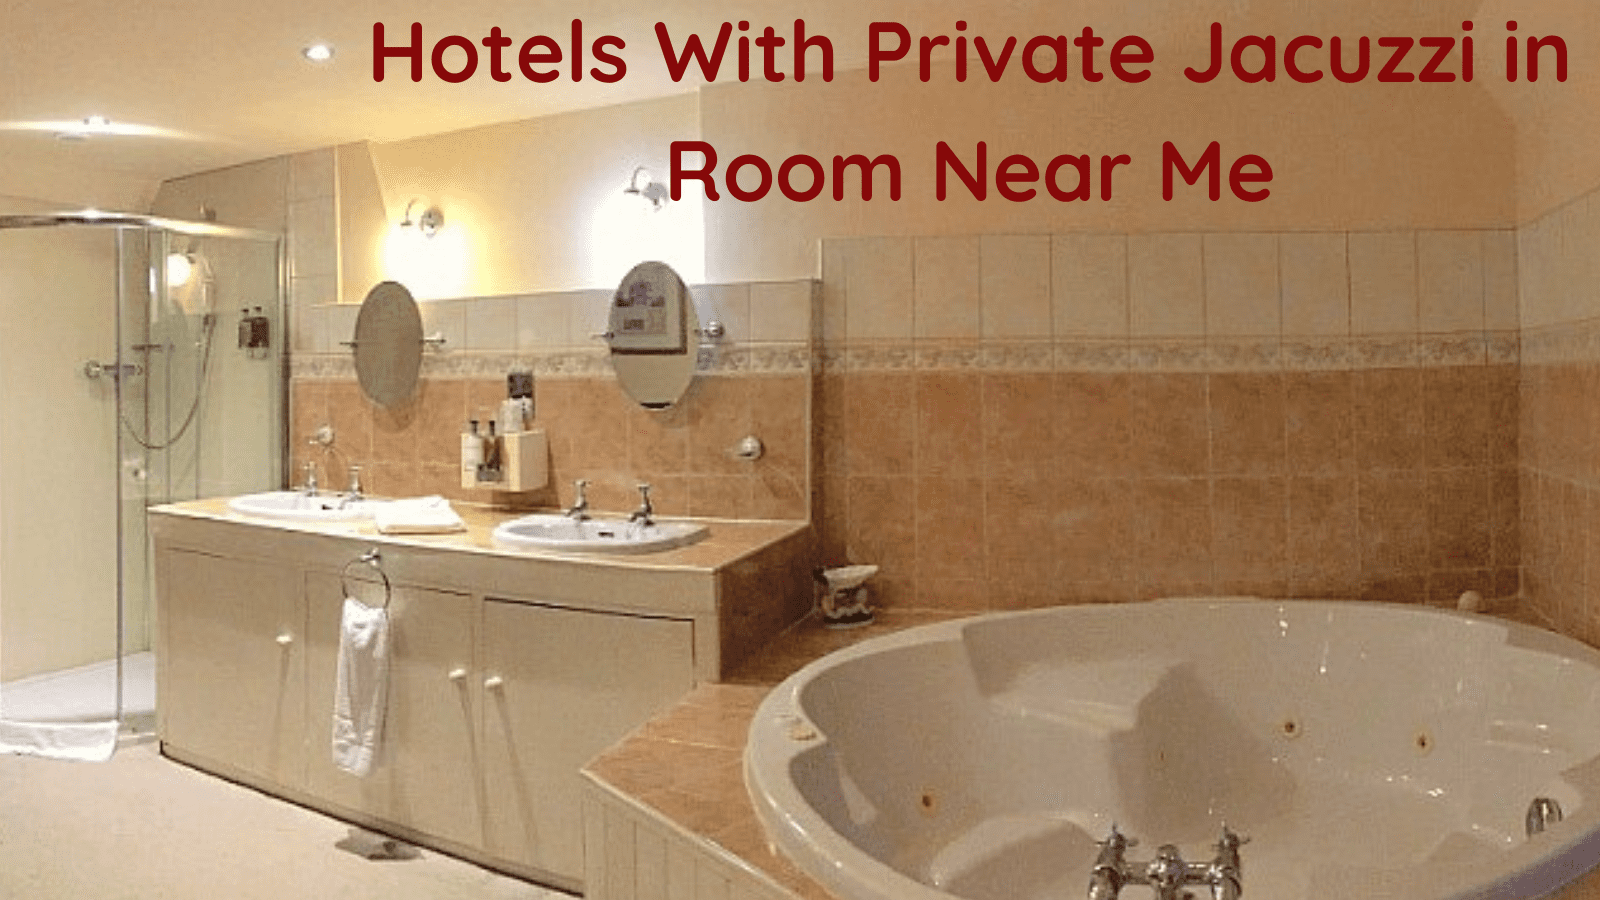 Best Hotels With Private Jacuzzi in Room Near Me [80% Off]